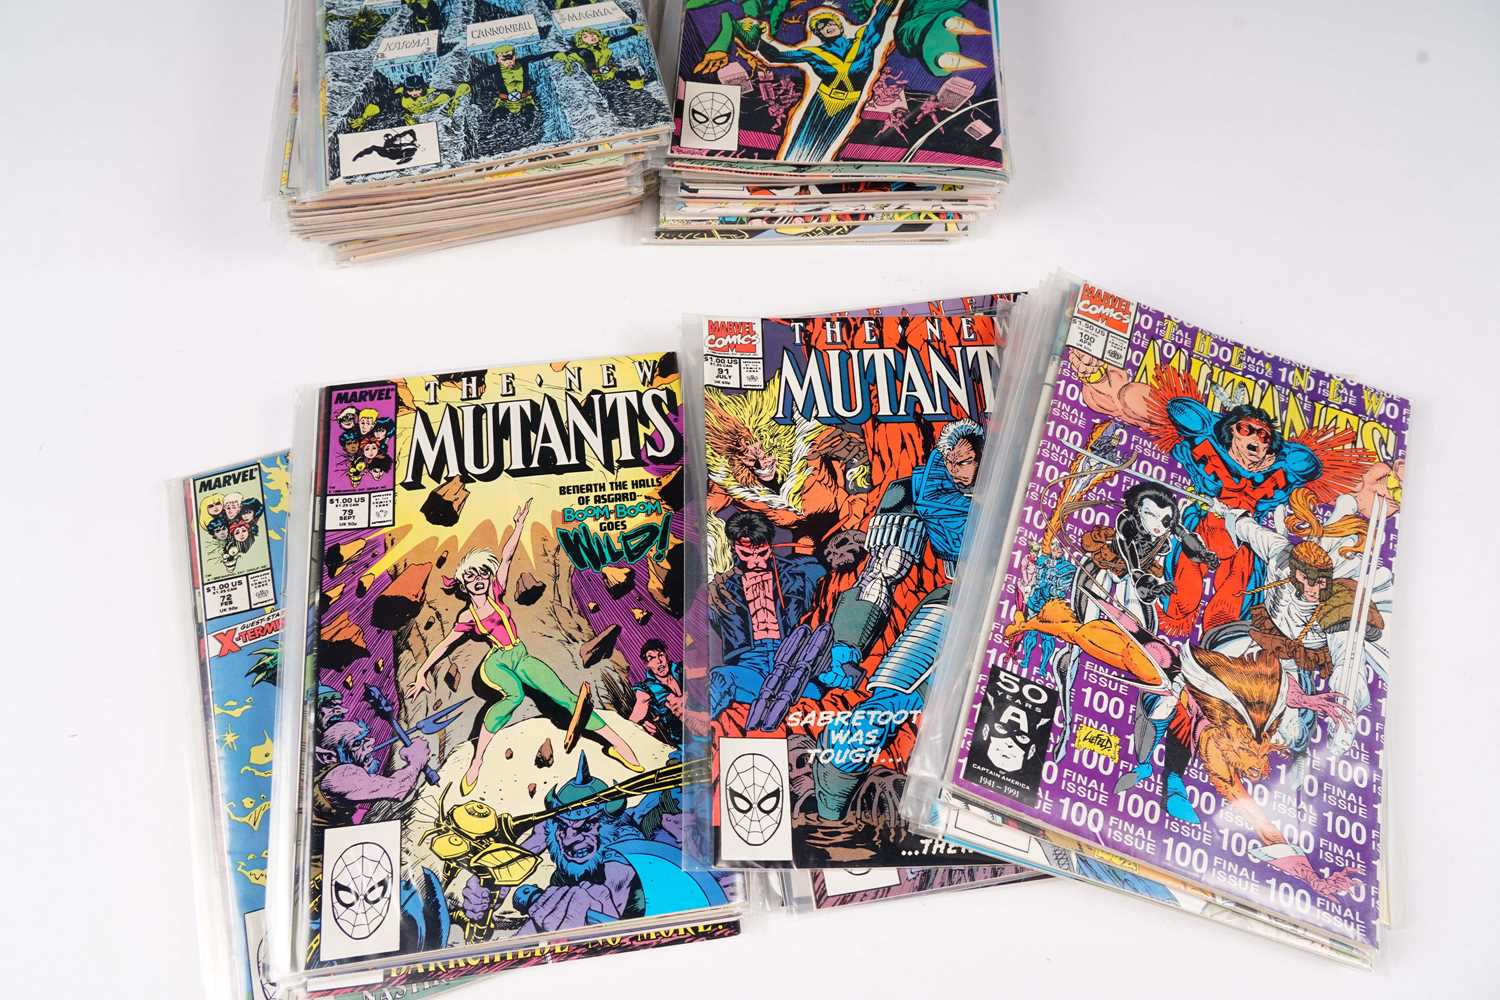 The New Mutants (First Series) by Marvel Comics - Image 2 of 4